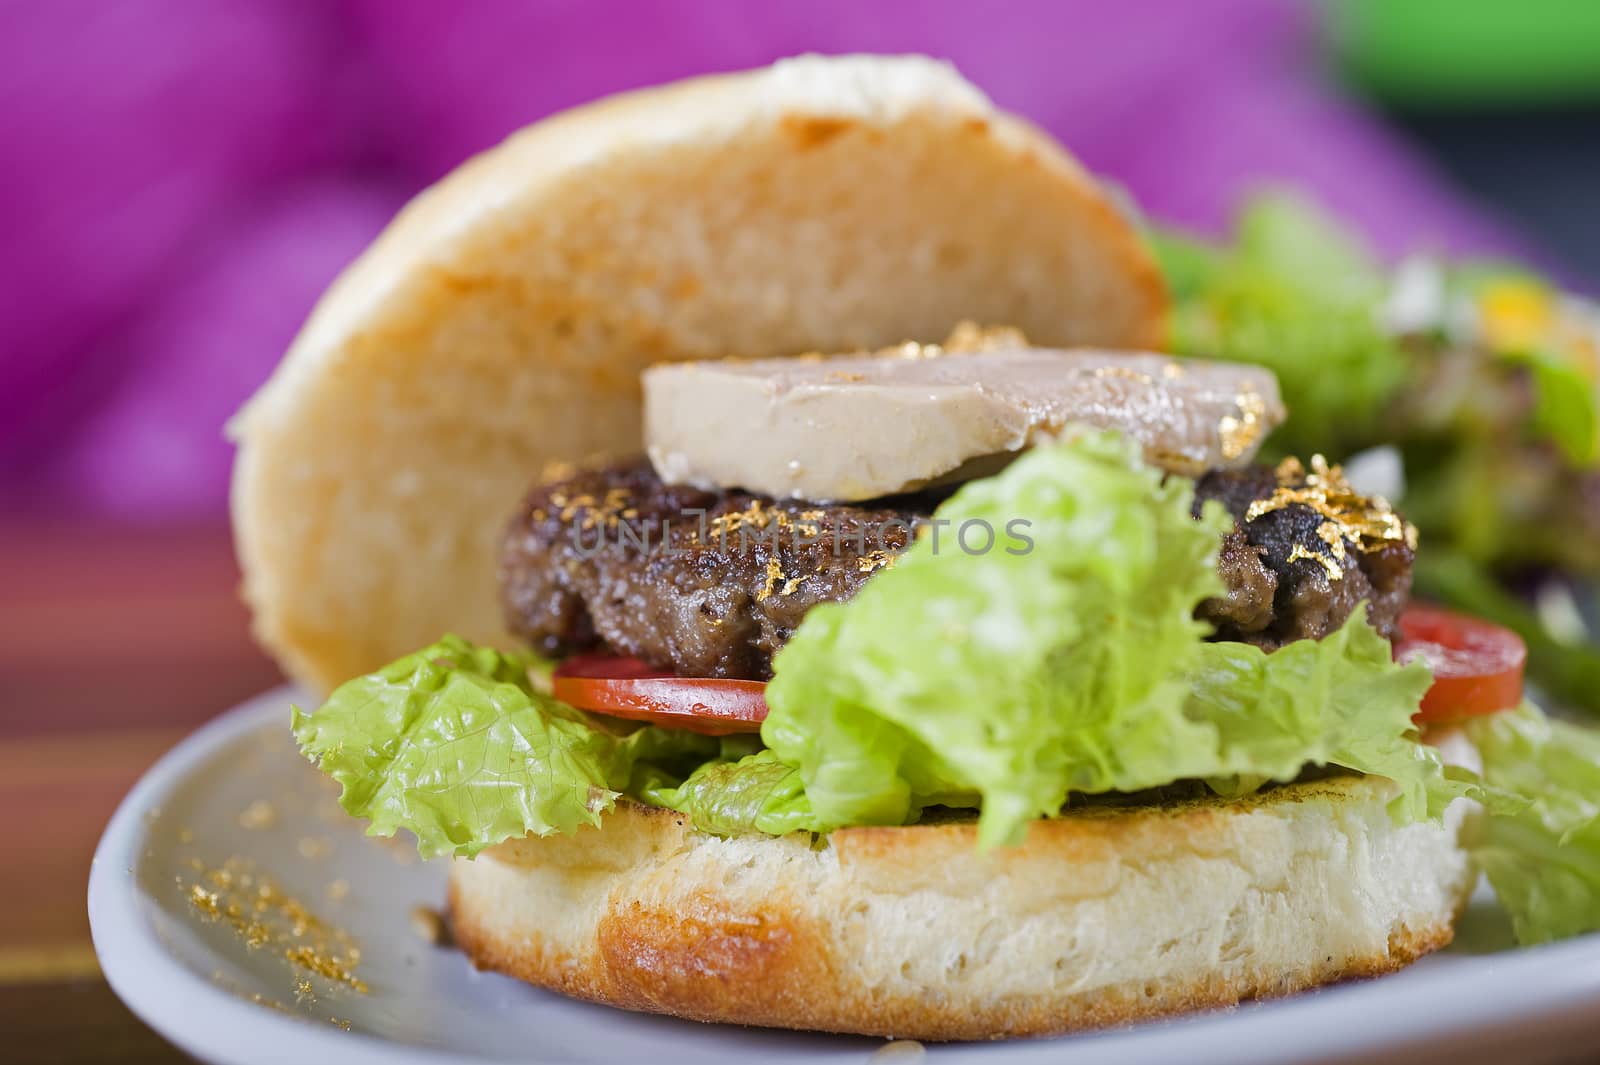 Gourmet beef burger with fois gras and gold leaf